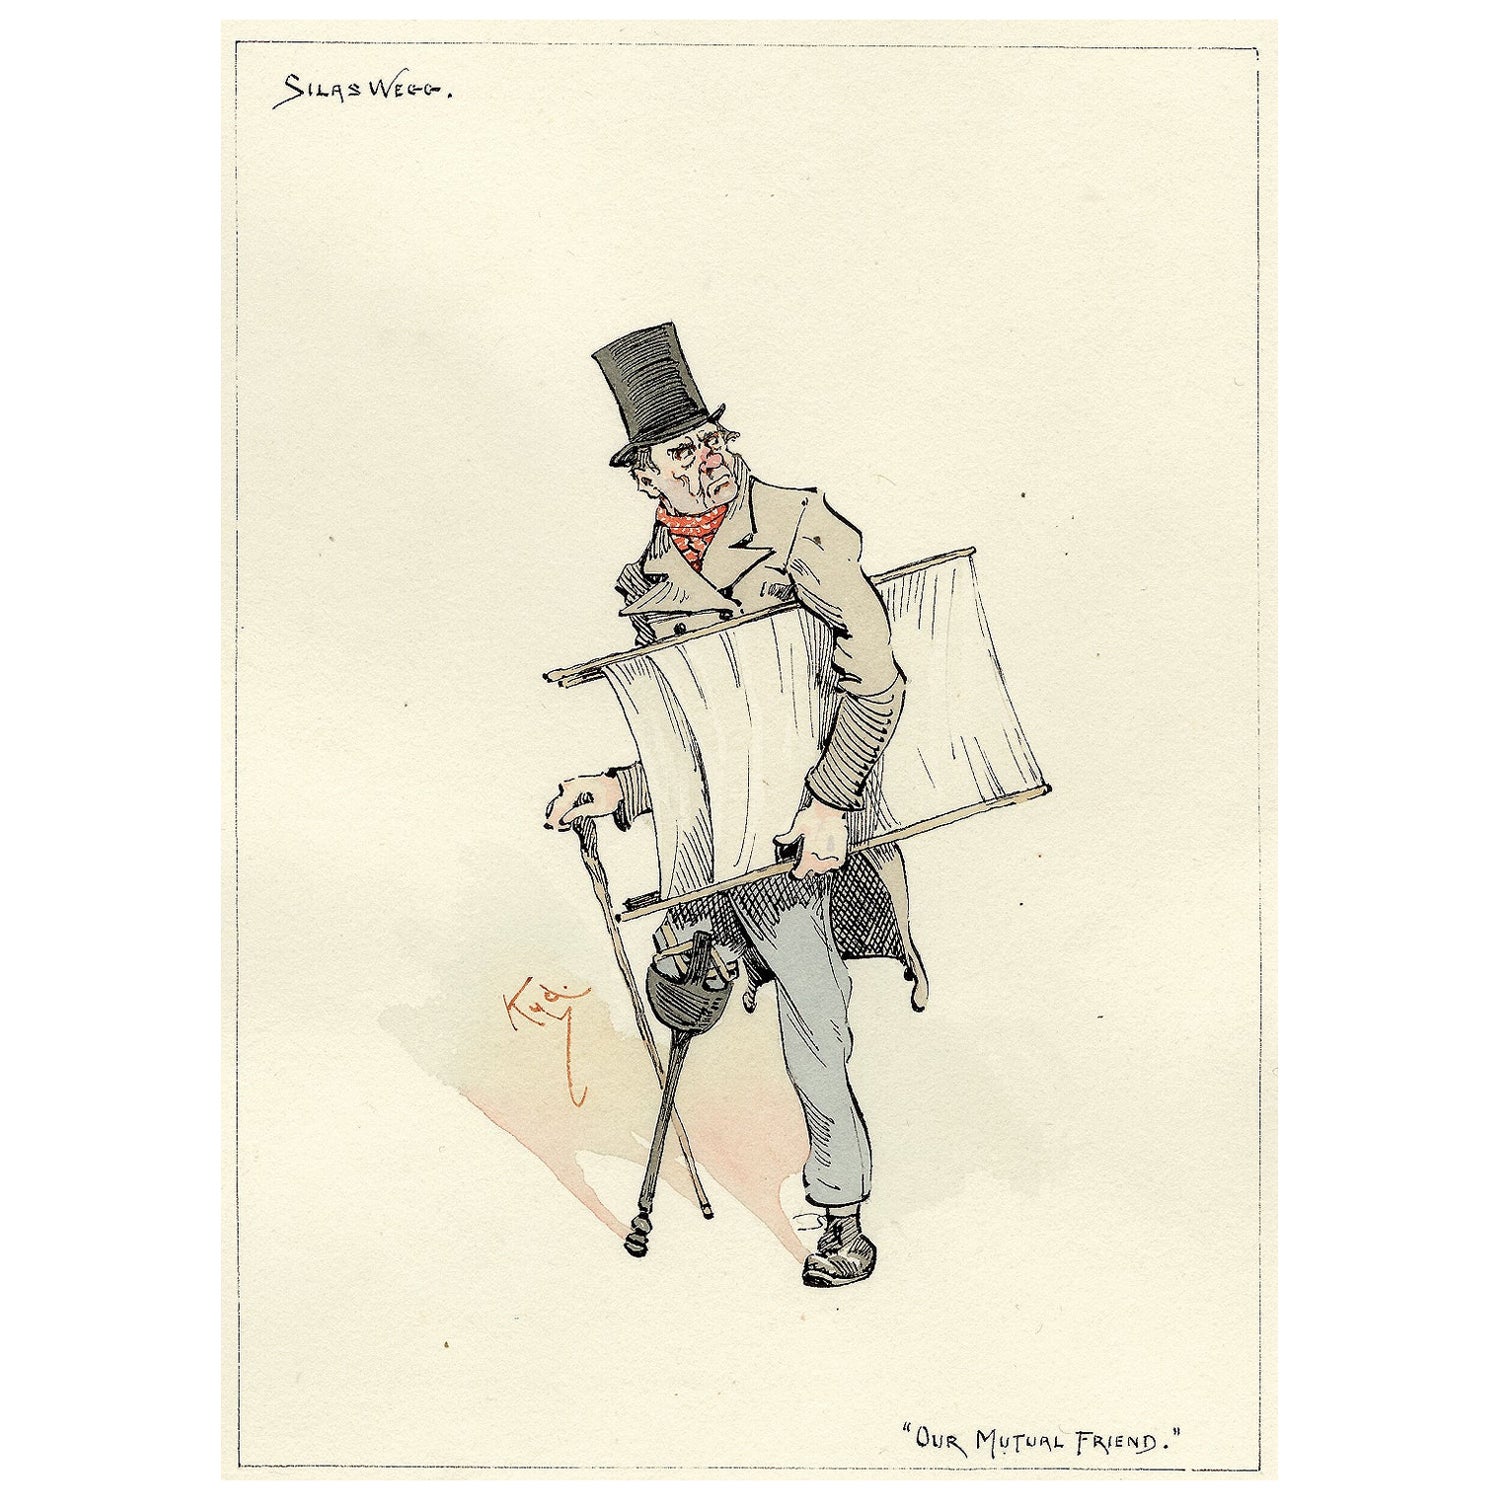 (KYD) - DICKENS - Silas Wegg (from Our Mutual Friend) - ORIGINAL SKETCH For Sale